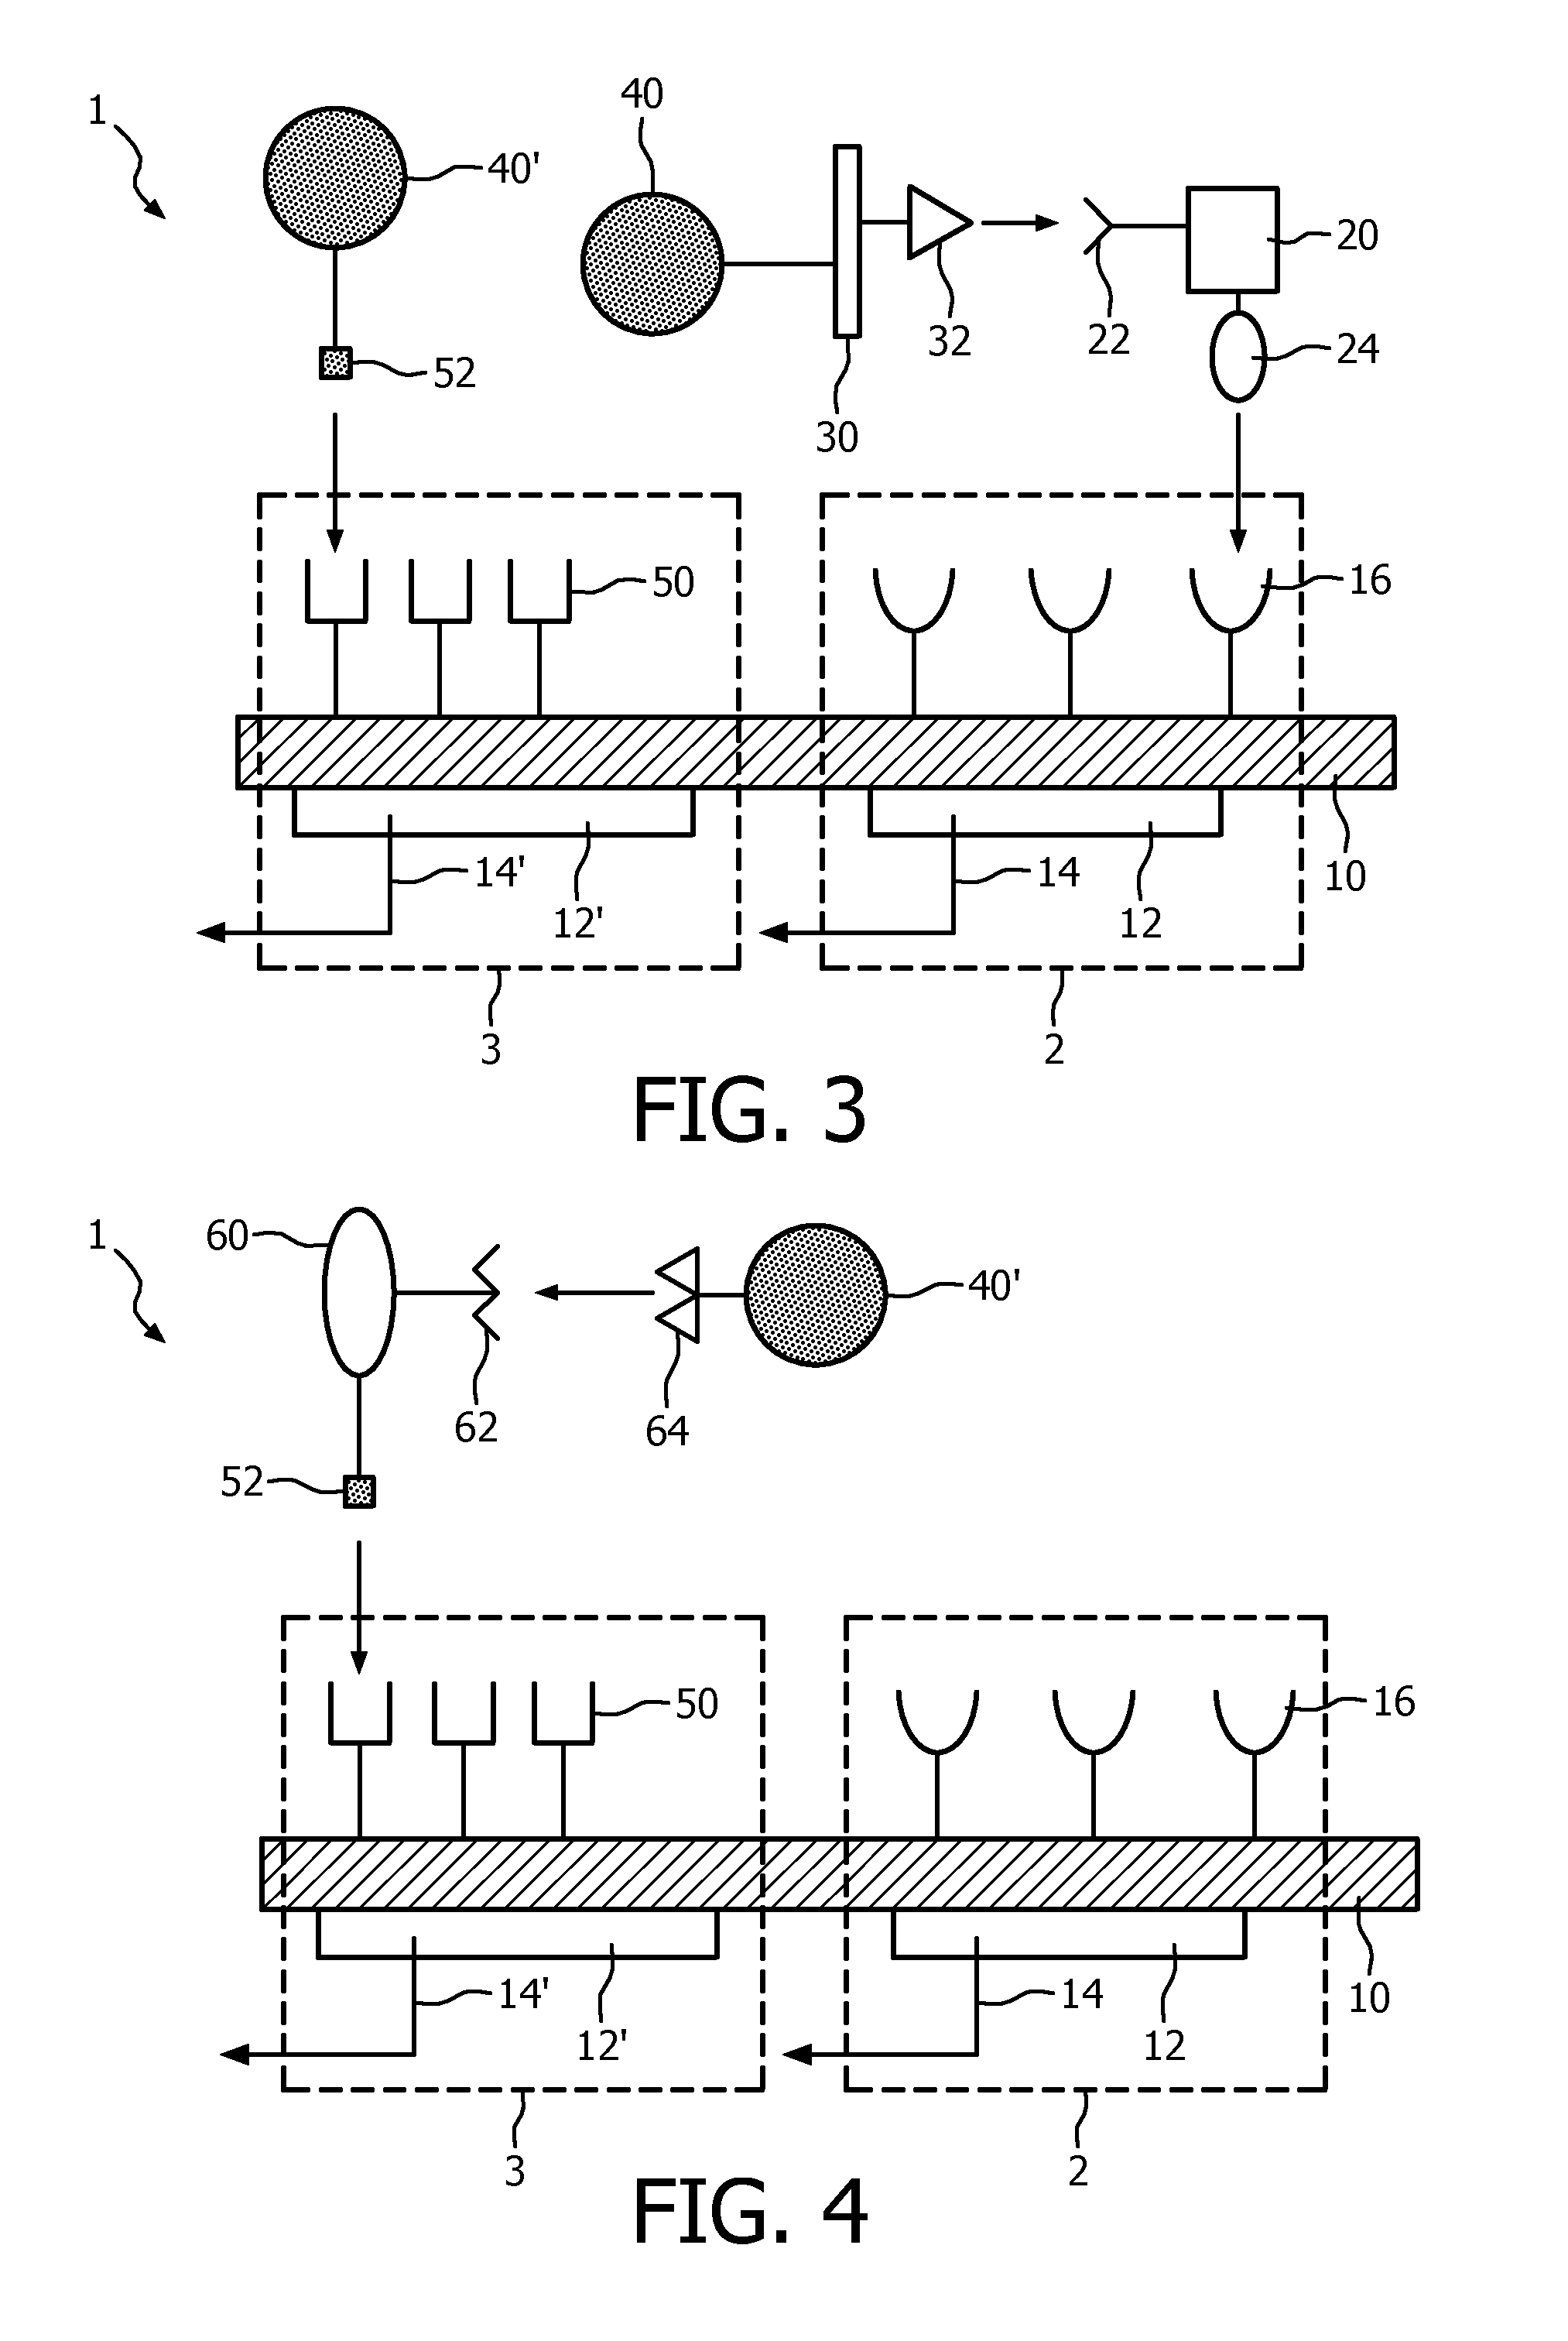 Magnetic sensor device, method of operating such a device and sample